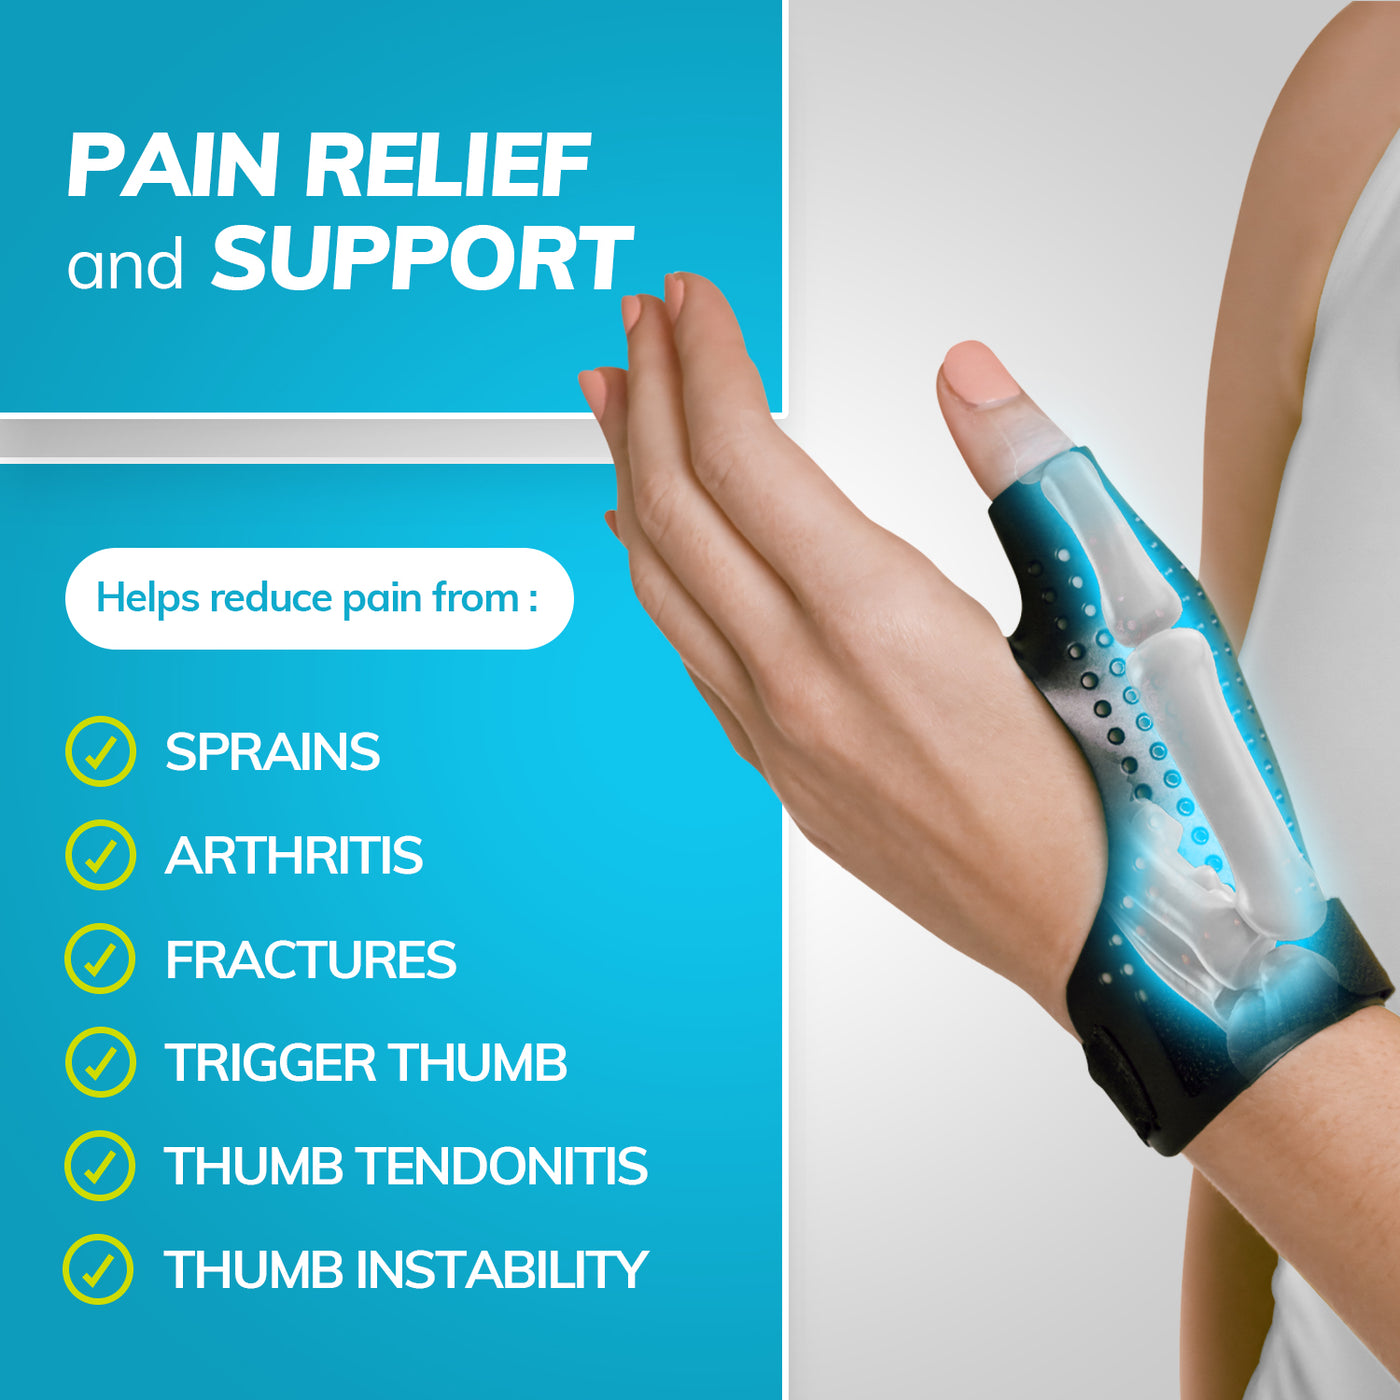 Expereince thumb pain relief and support from sprains, arthritis, fractures, and trigger thumb